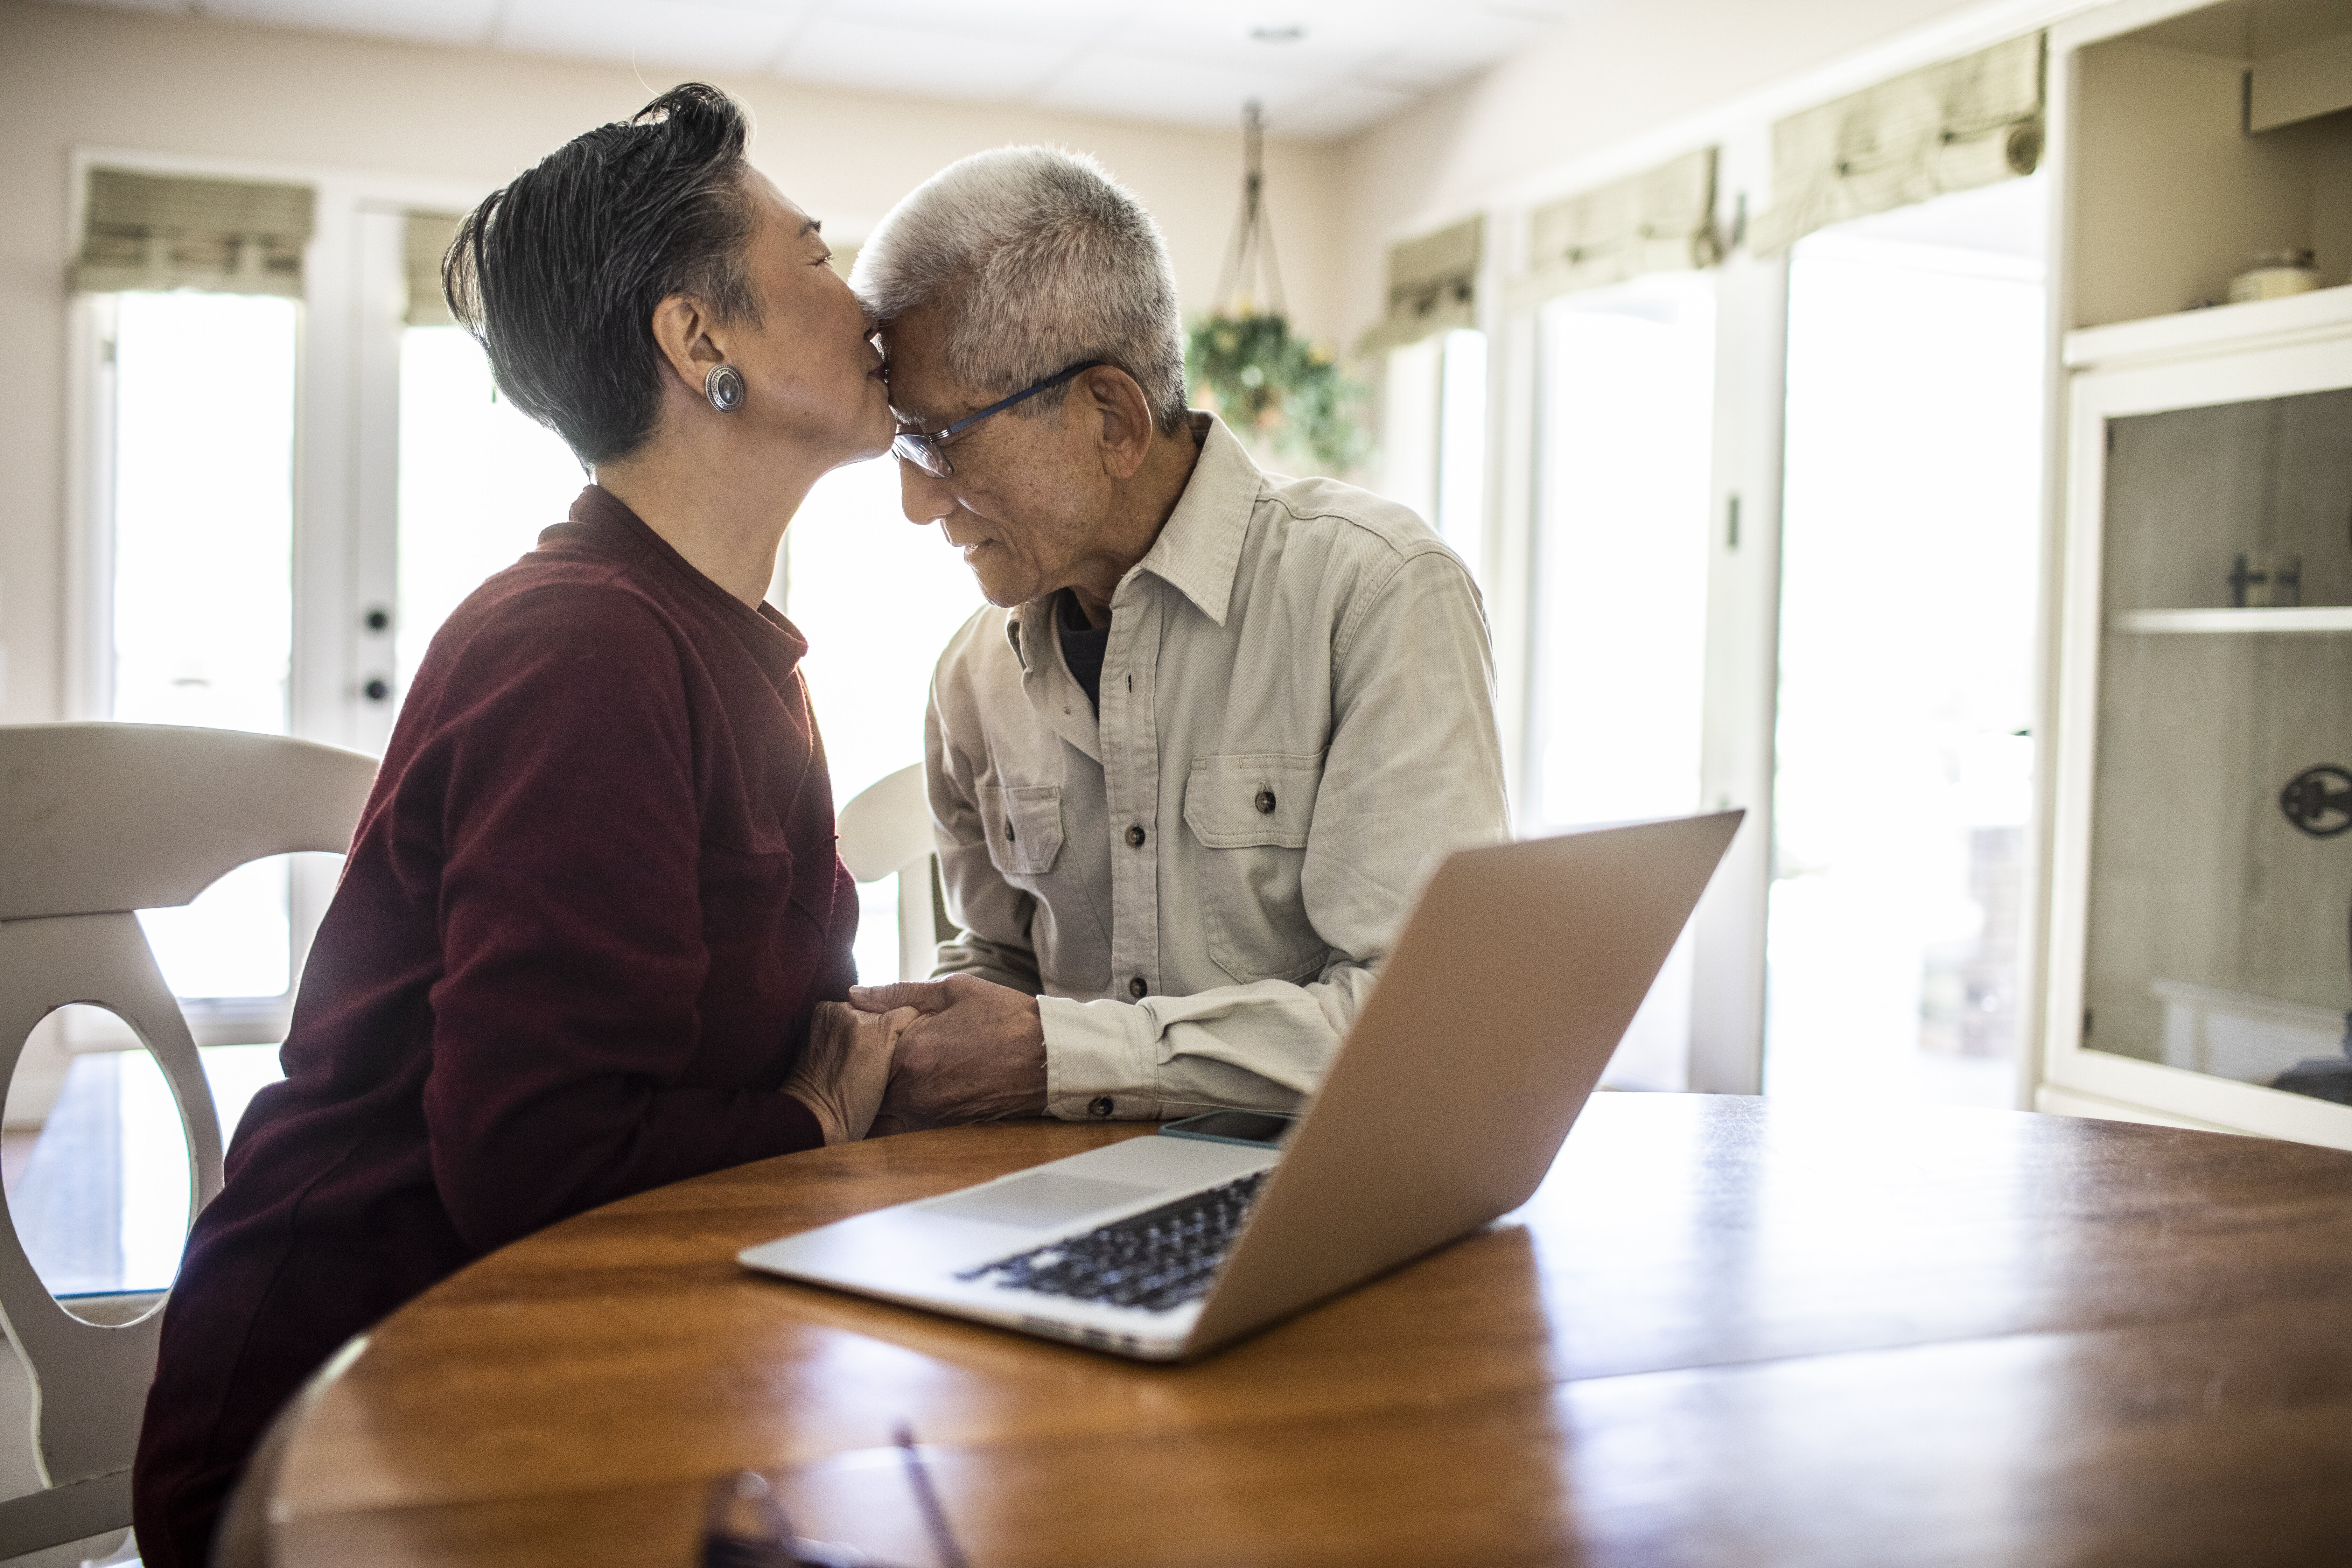 Older couple shares a loving kiss at a table with a laptop, manifesting affection